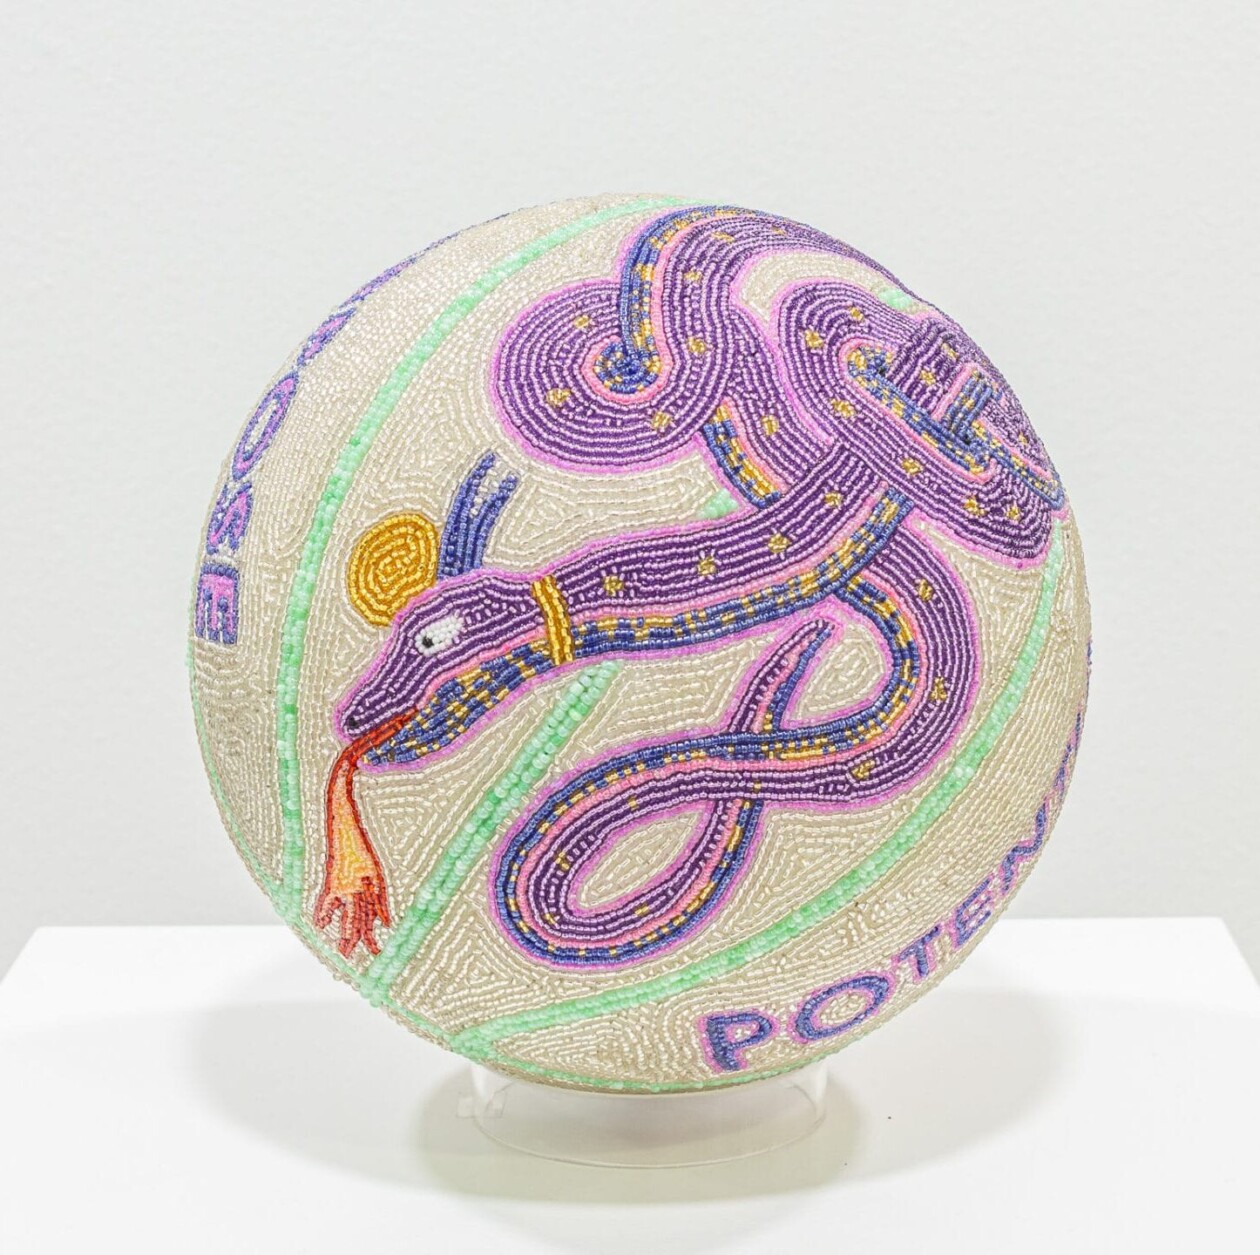 From Playground To Prophecy, Jorge Mañes Rubio's Beaded Basketball Sculptures (7)